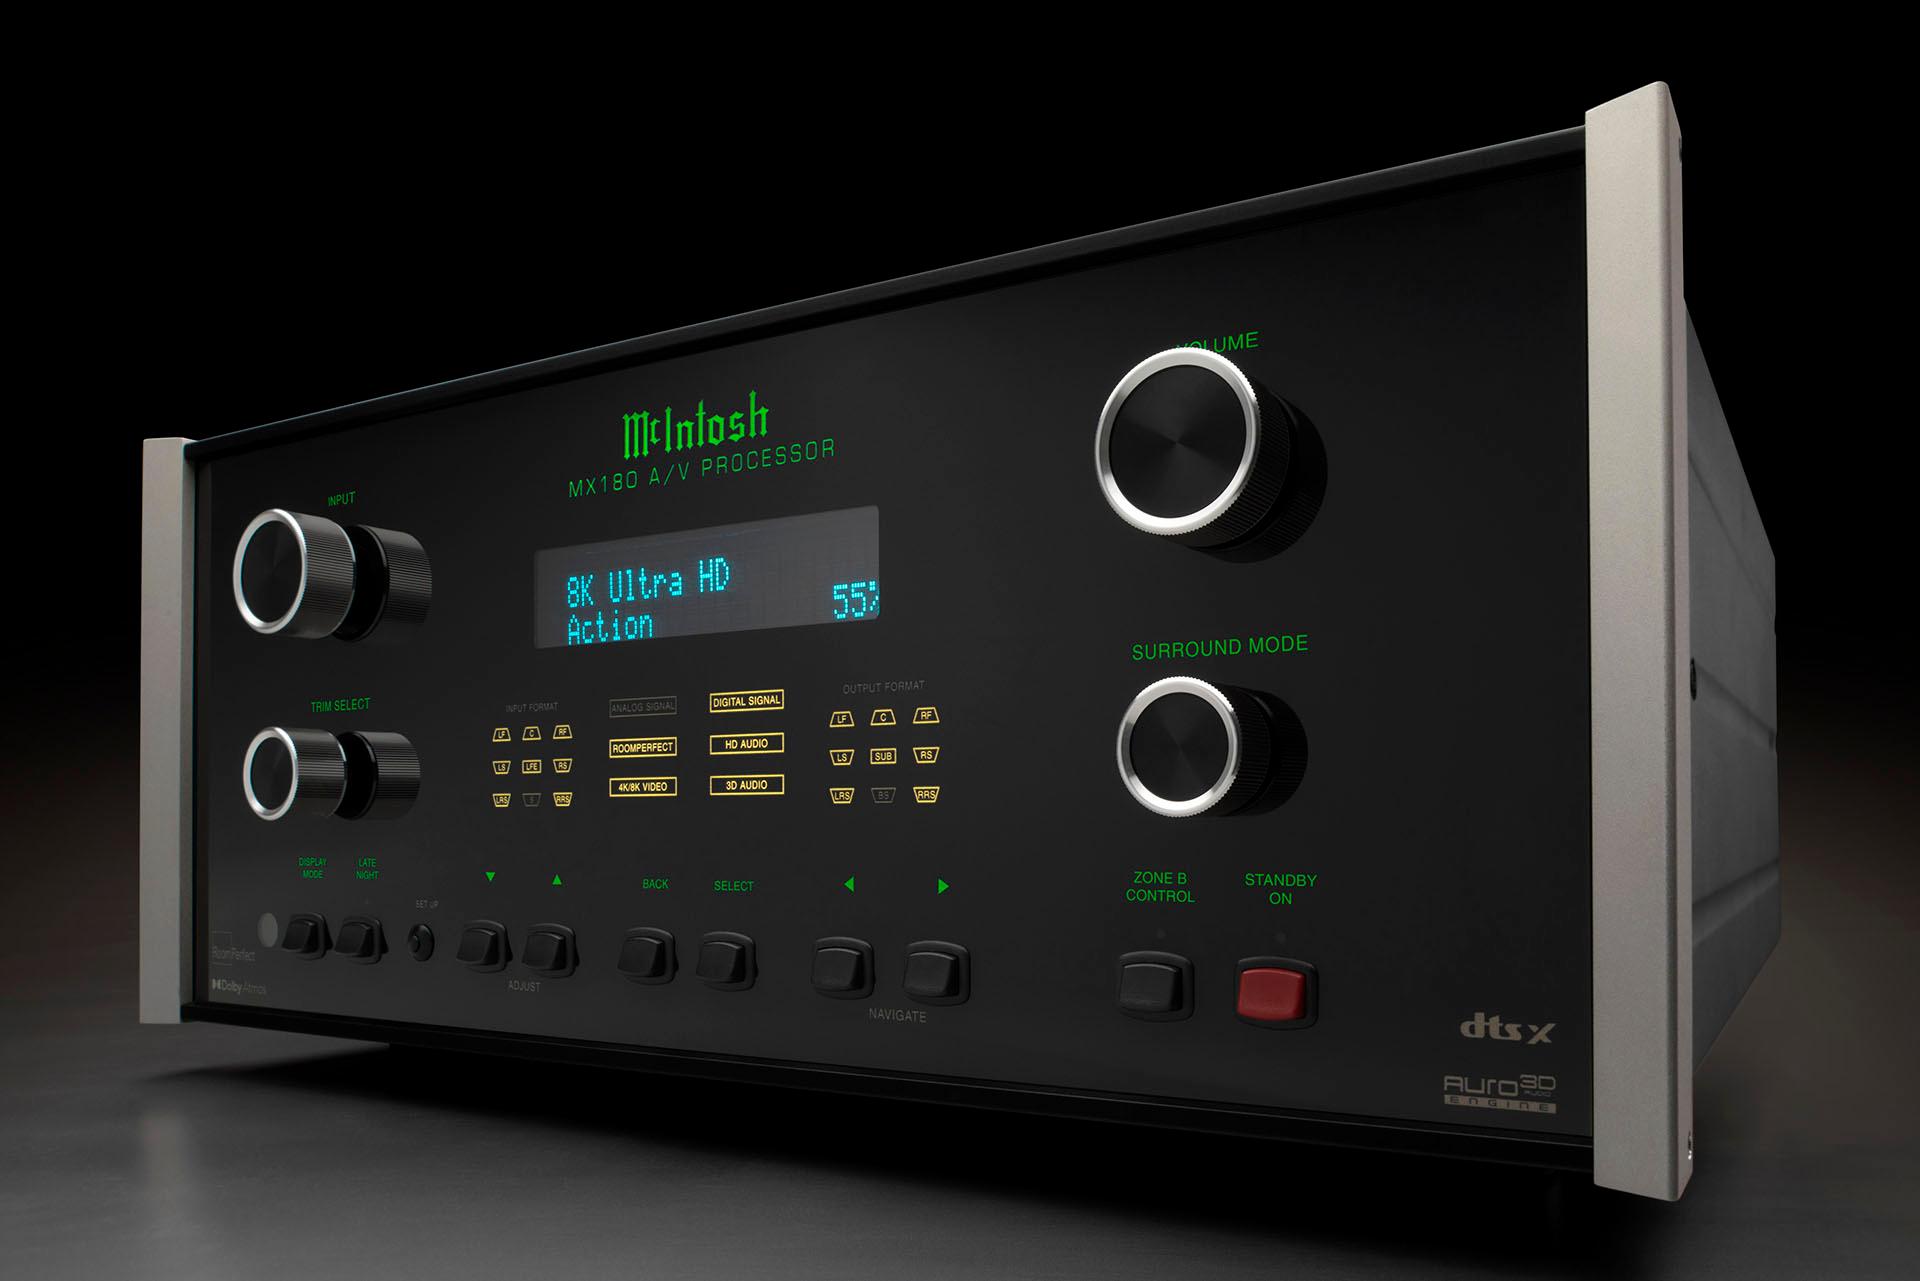 With its newest A/V processor, the MX180 ($17,000), McIntosh is ready for the future of home entertainment. By incorporating 8K HDMI support, along with 4K/120 Hz capability, this state-of-the-art processor is designed to handle anything you throw at it. 16 balanced audio outputs allow for speaker configurations up to 15.1, or 9.1.6 with explicit support for Dolby® Atmos, DTS:X® Pro, and Auro-3D®. Plus its equipped with HDMI eARC allowing for a lossless audio connection to eARC-equipped display devices, including the 3D immersive formats. 10d8178c mx180 hero hi res